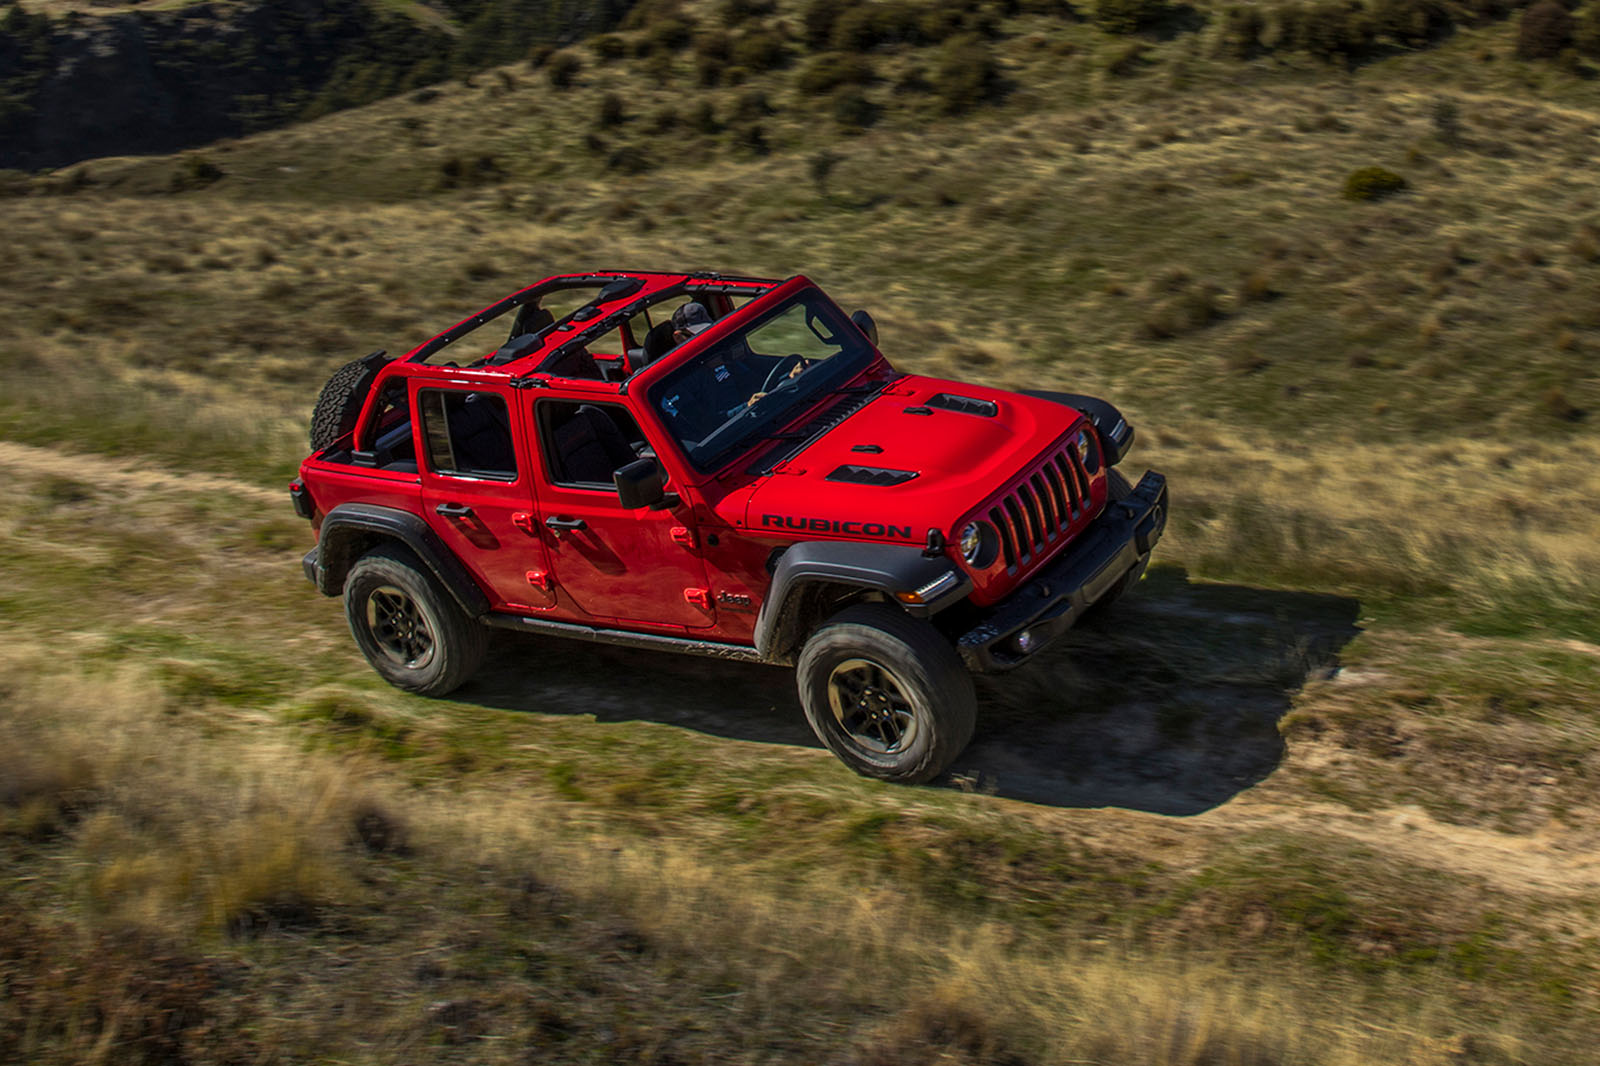 Jeep Wrangler (JL) Unlimited Rubicon 2018 review | Autocar